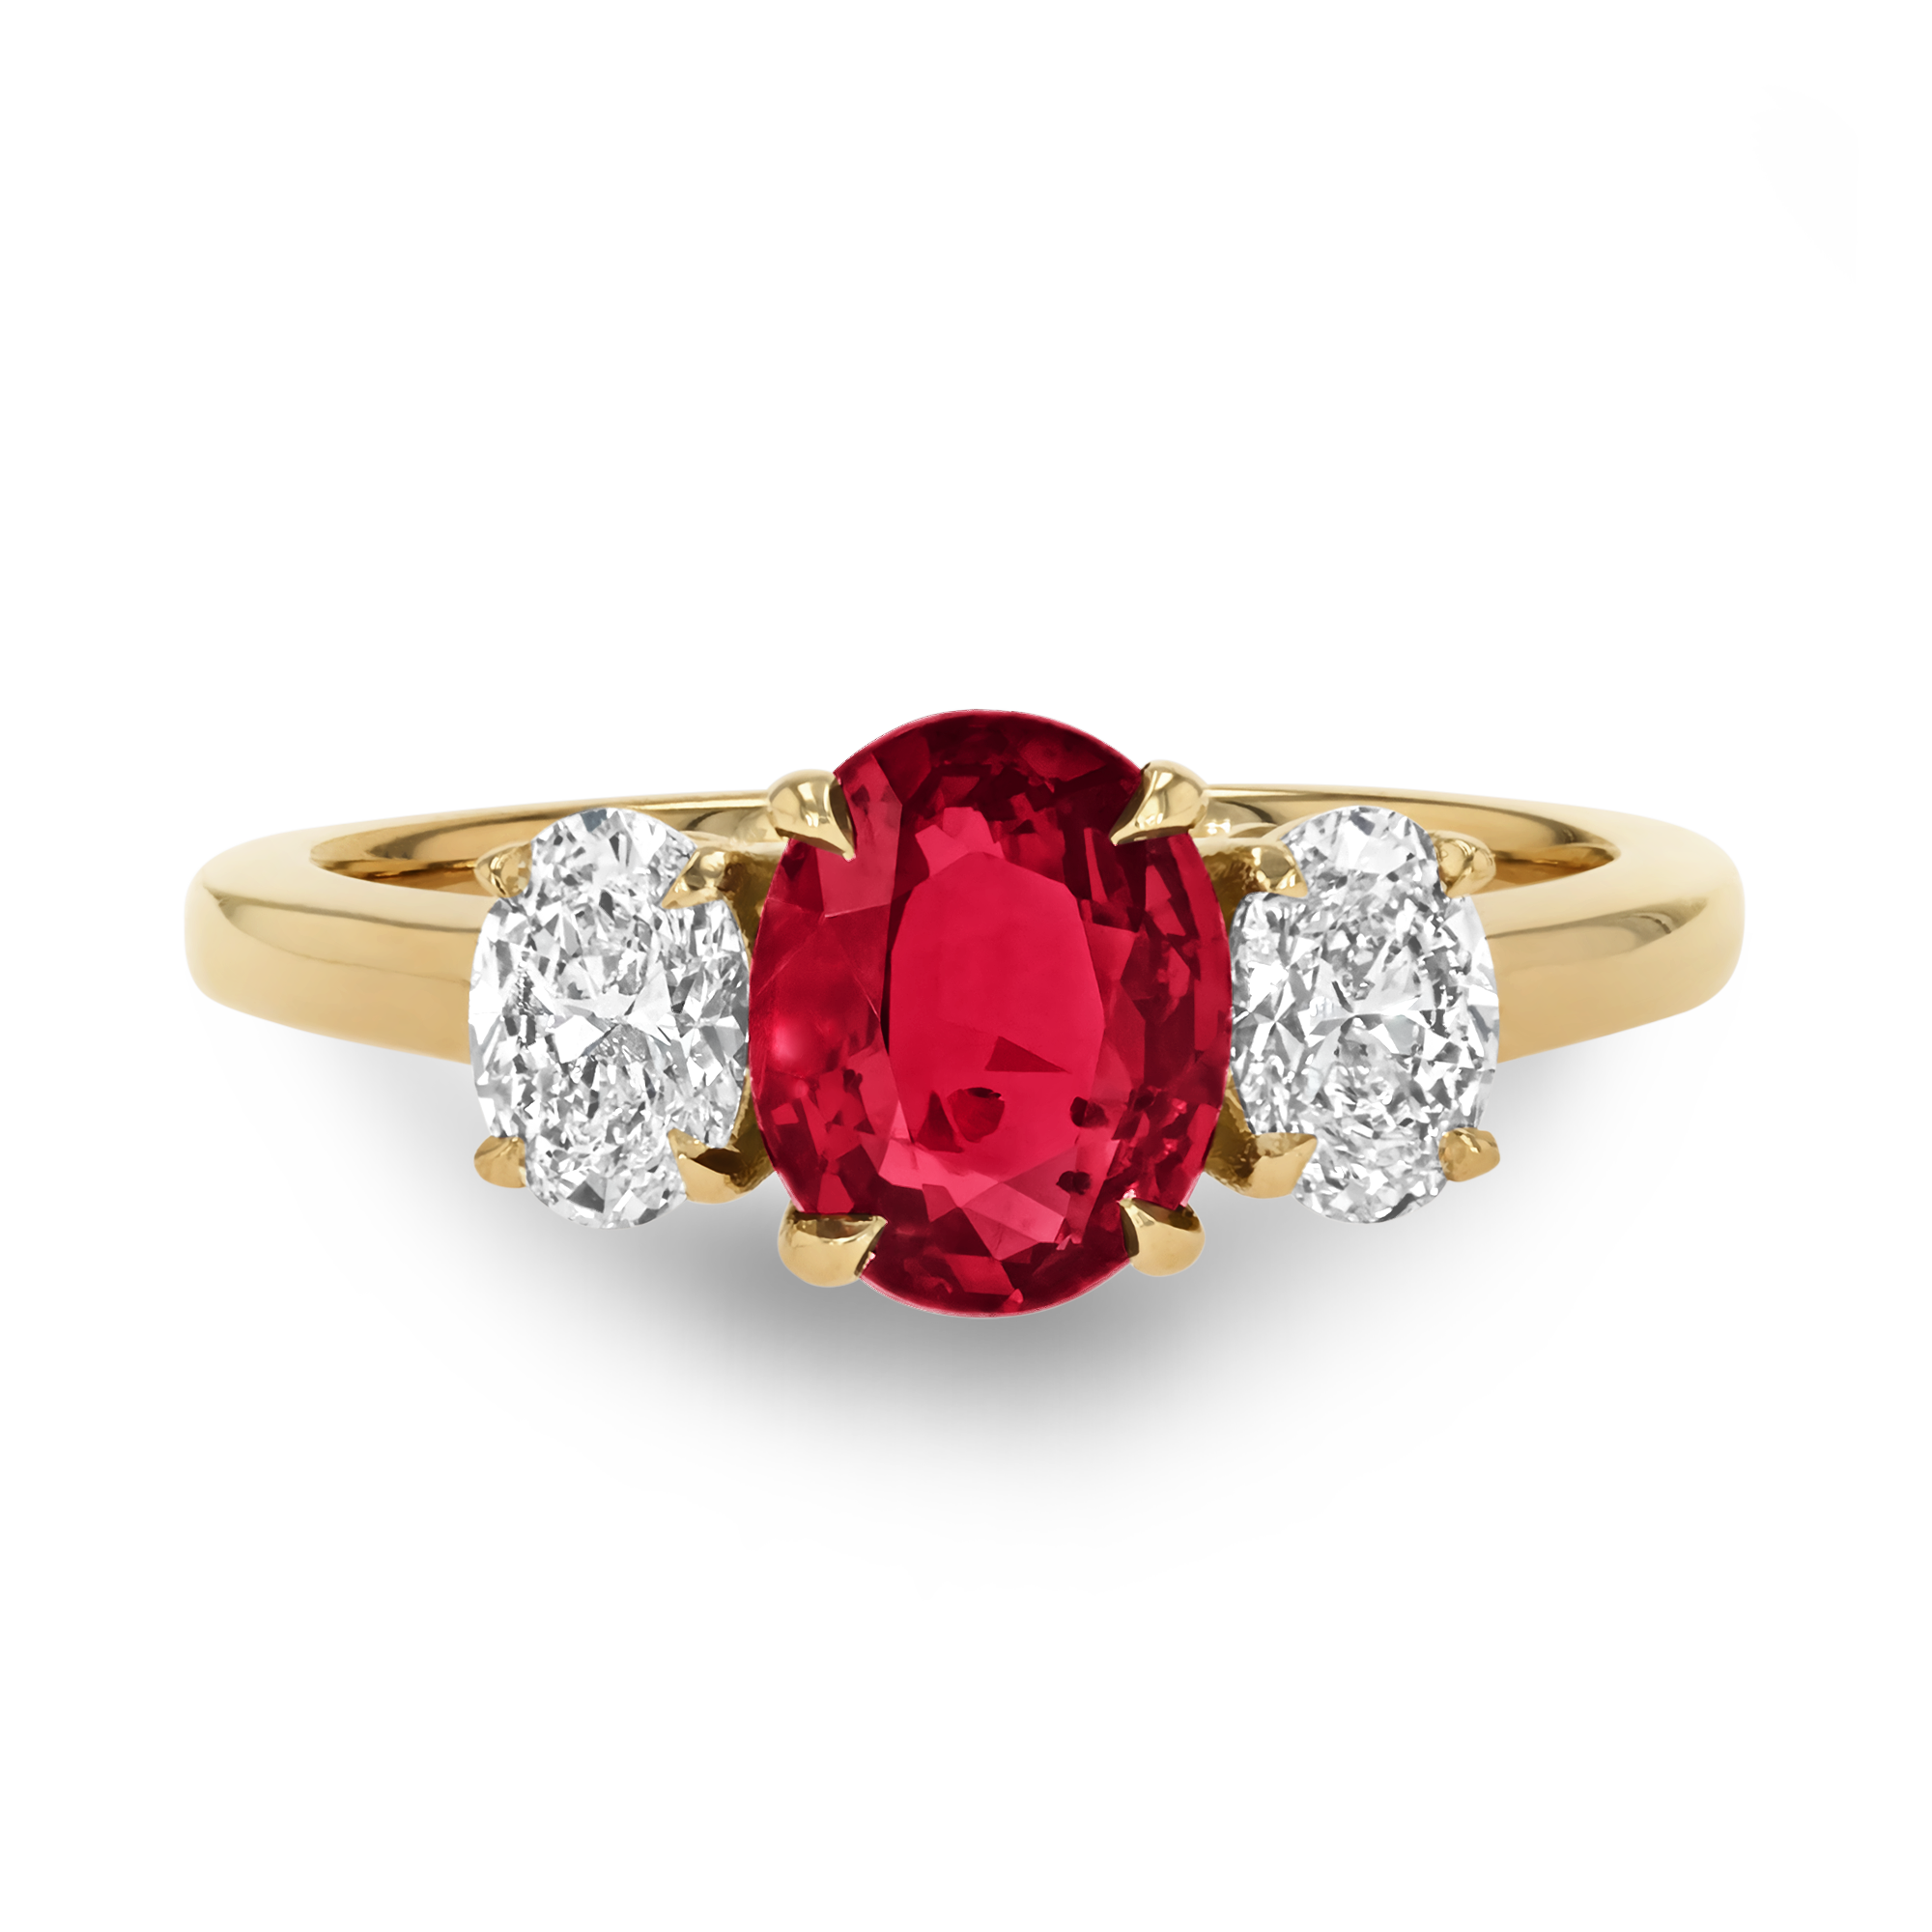 Mozambique 1.53ct Ruby and Diamond Three Stone Ring Oval Cut, Claw Set_2